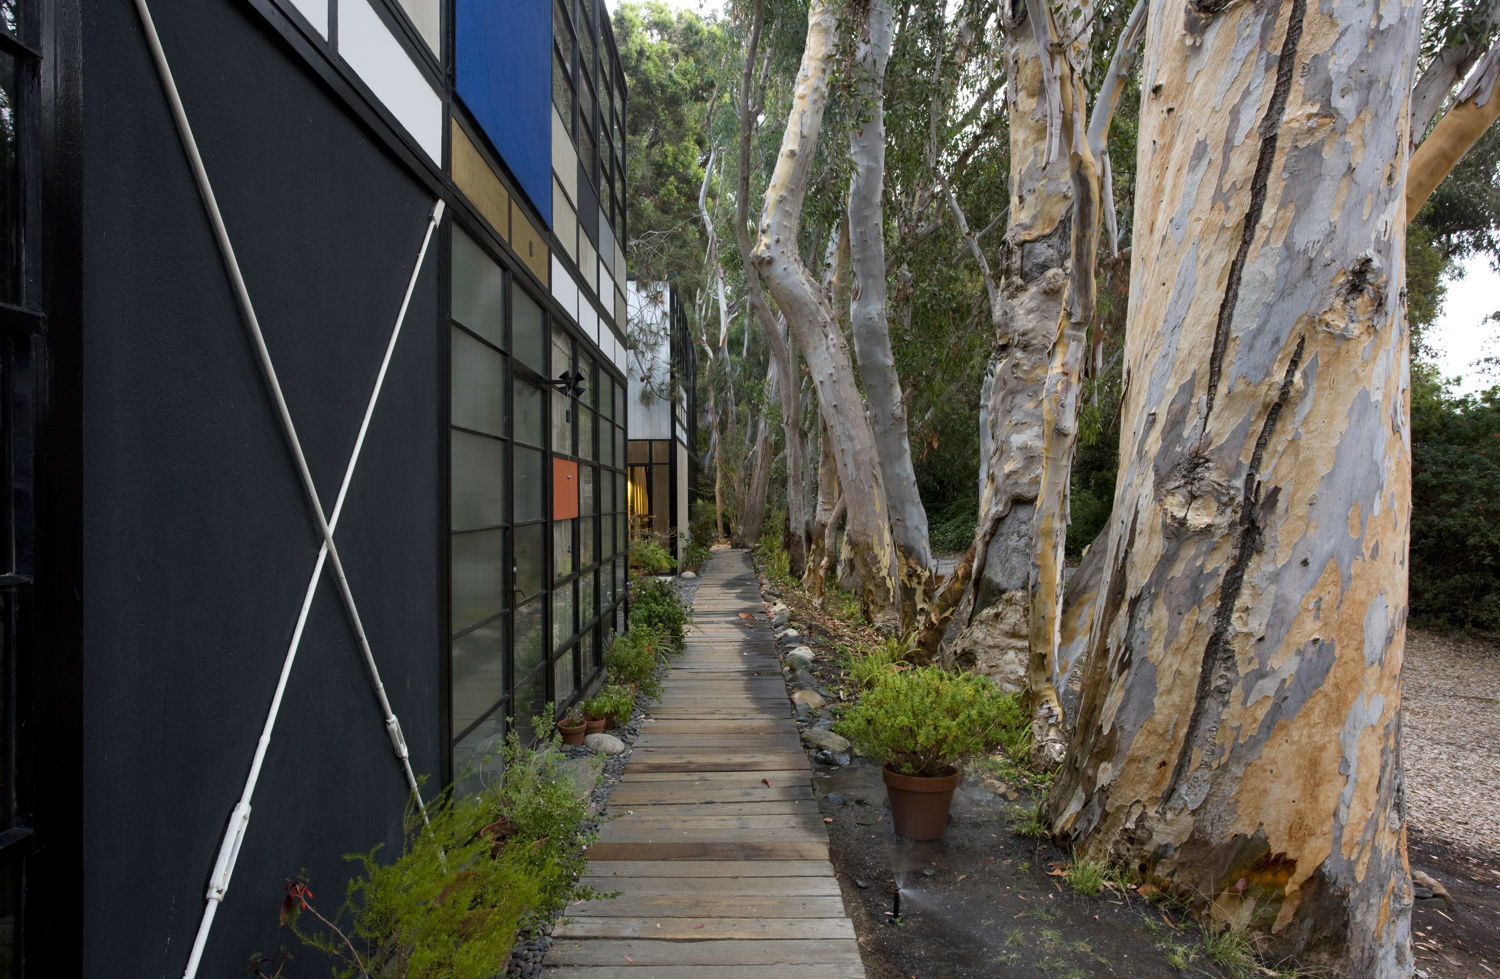 The wooden walkway and row of eucalyptus trees parallel to the Eames House’s facade. Photograph by Leslie Schwartz, 2017